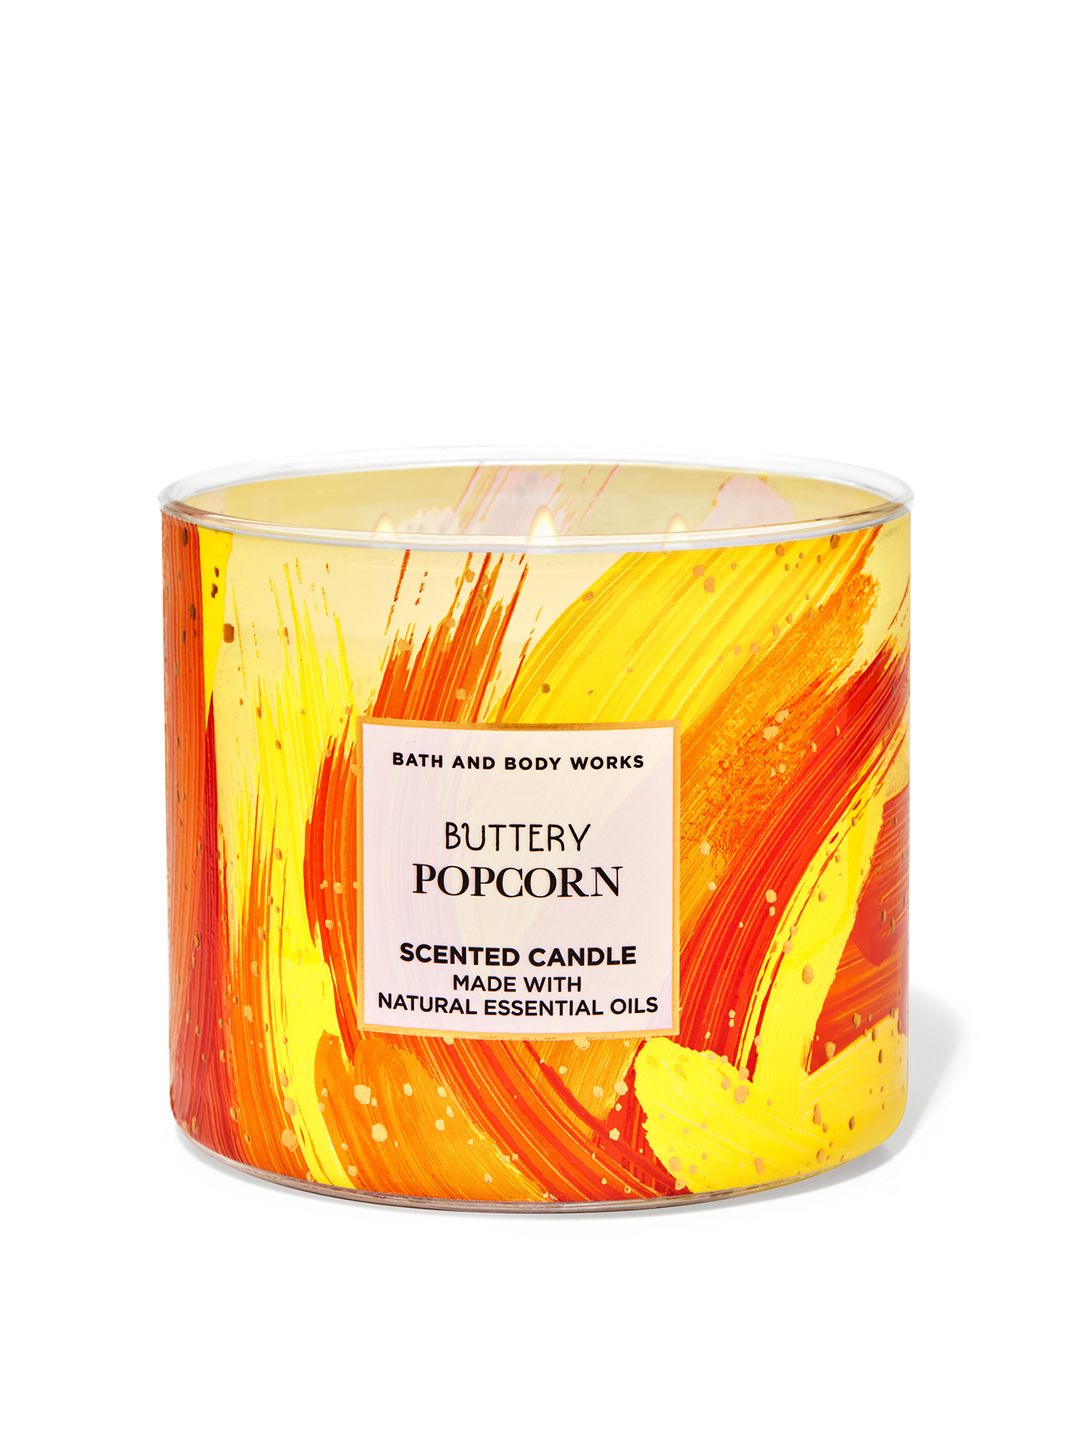 Bath & Body Works Buttery Popcorn 3-Wick Scented Candle with Natural Essential Oils - 411g Price in India